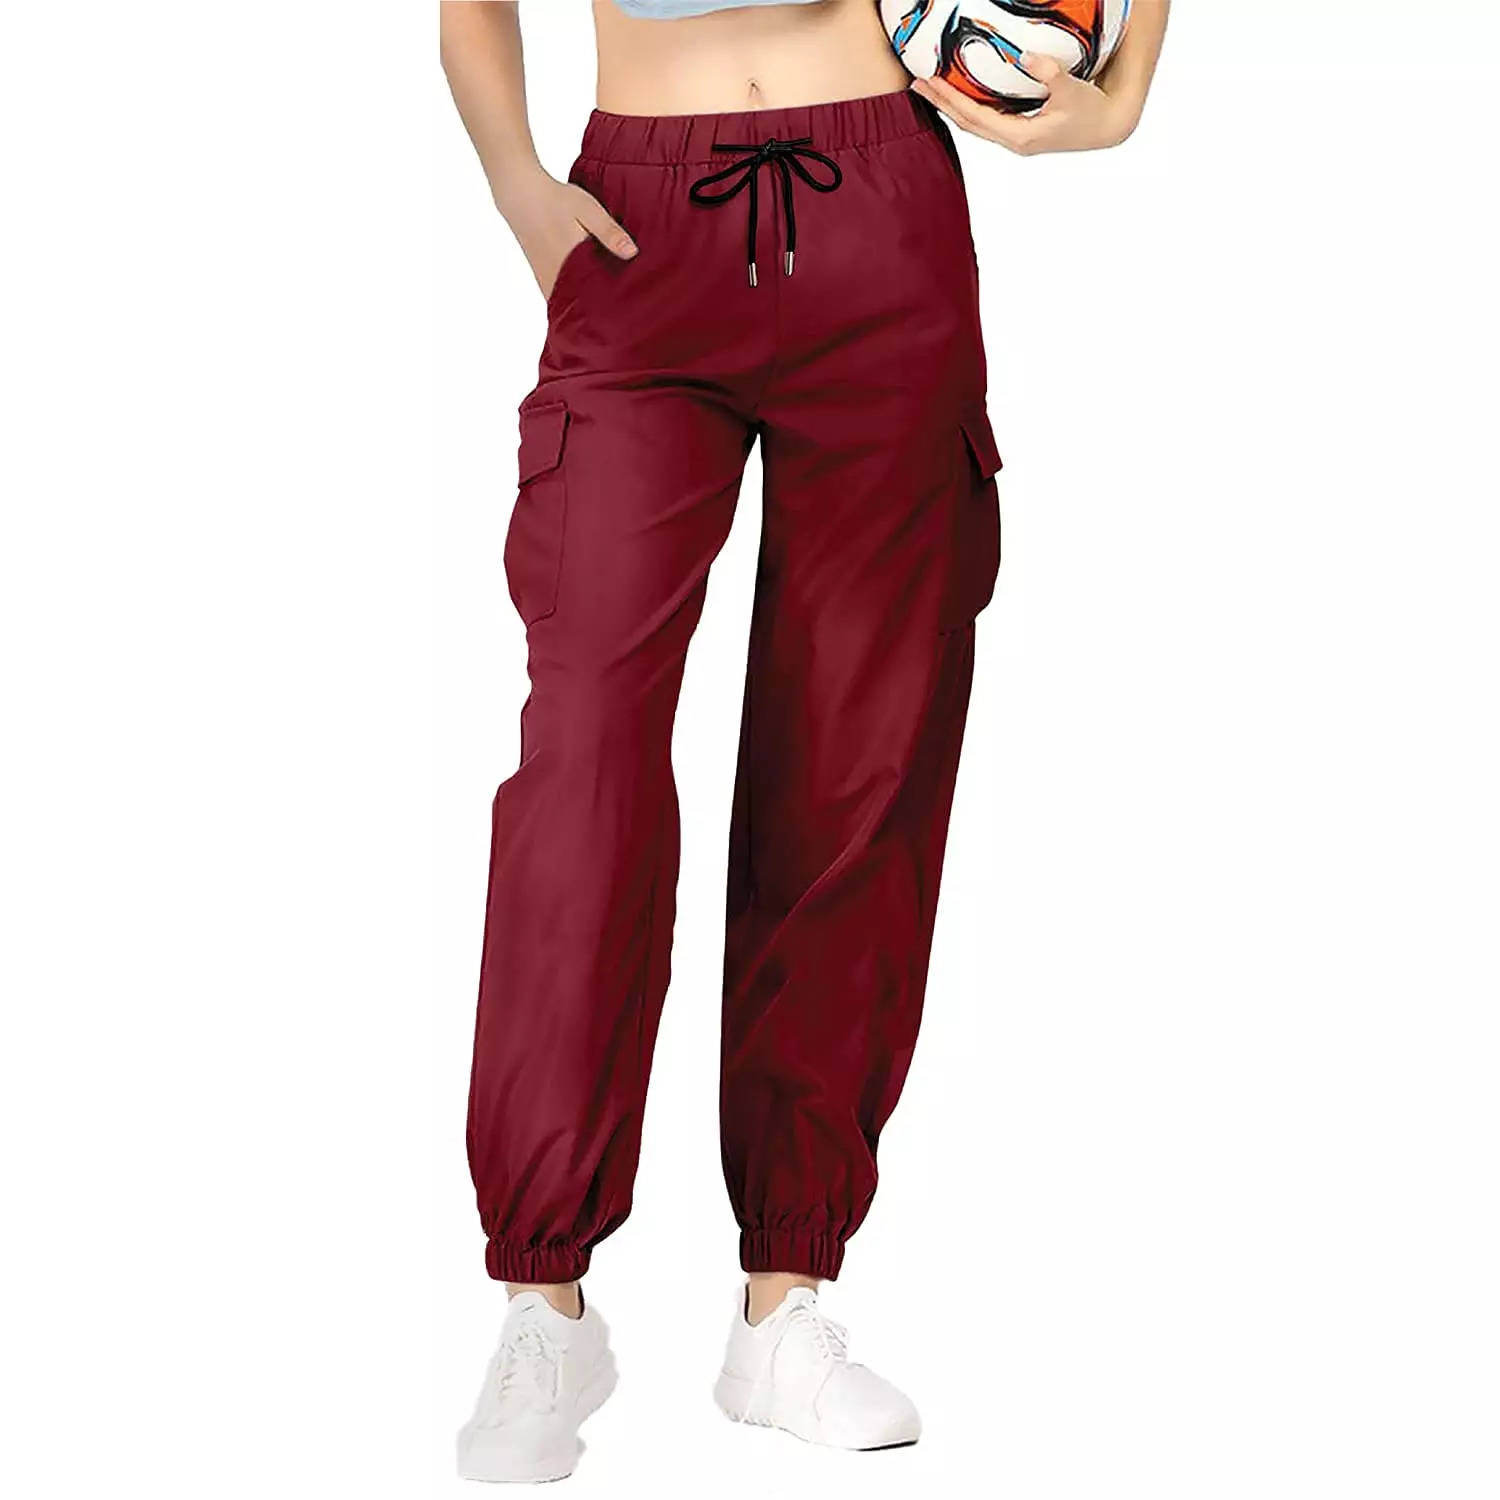 Womens Under Armour 1260174 Burgundy Absolute Cargo Pants! Size 4 NWT's!  $79.99 | eBay